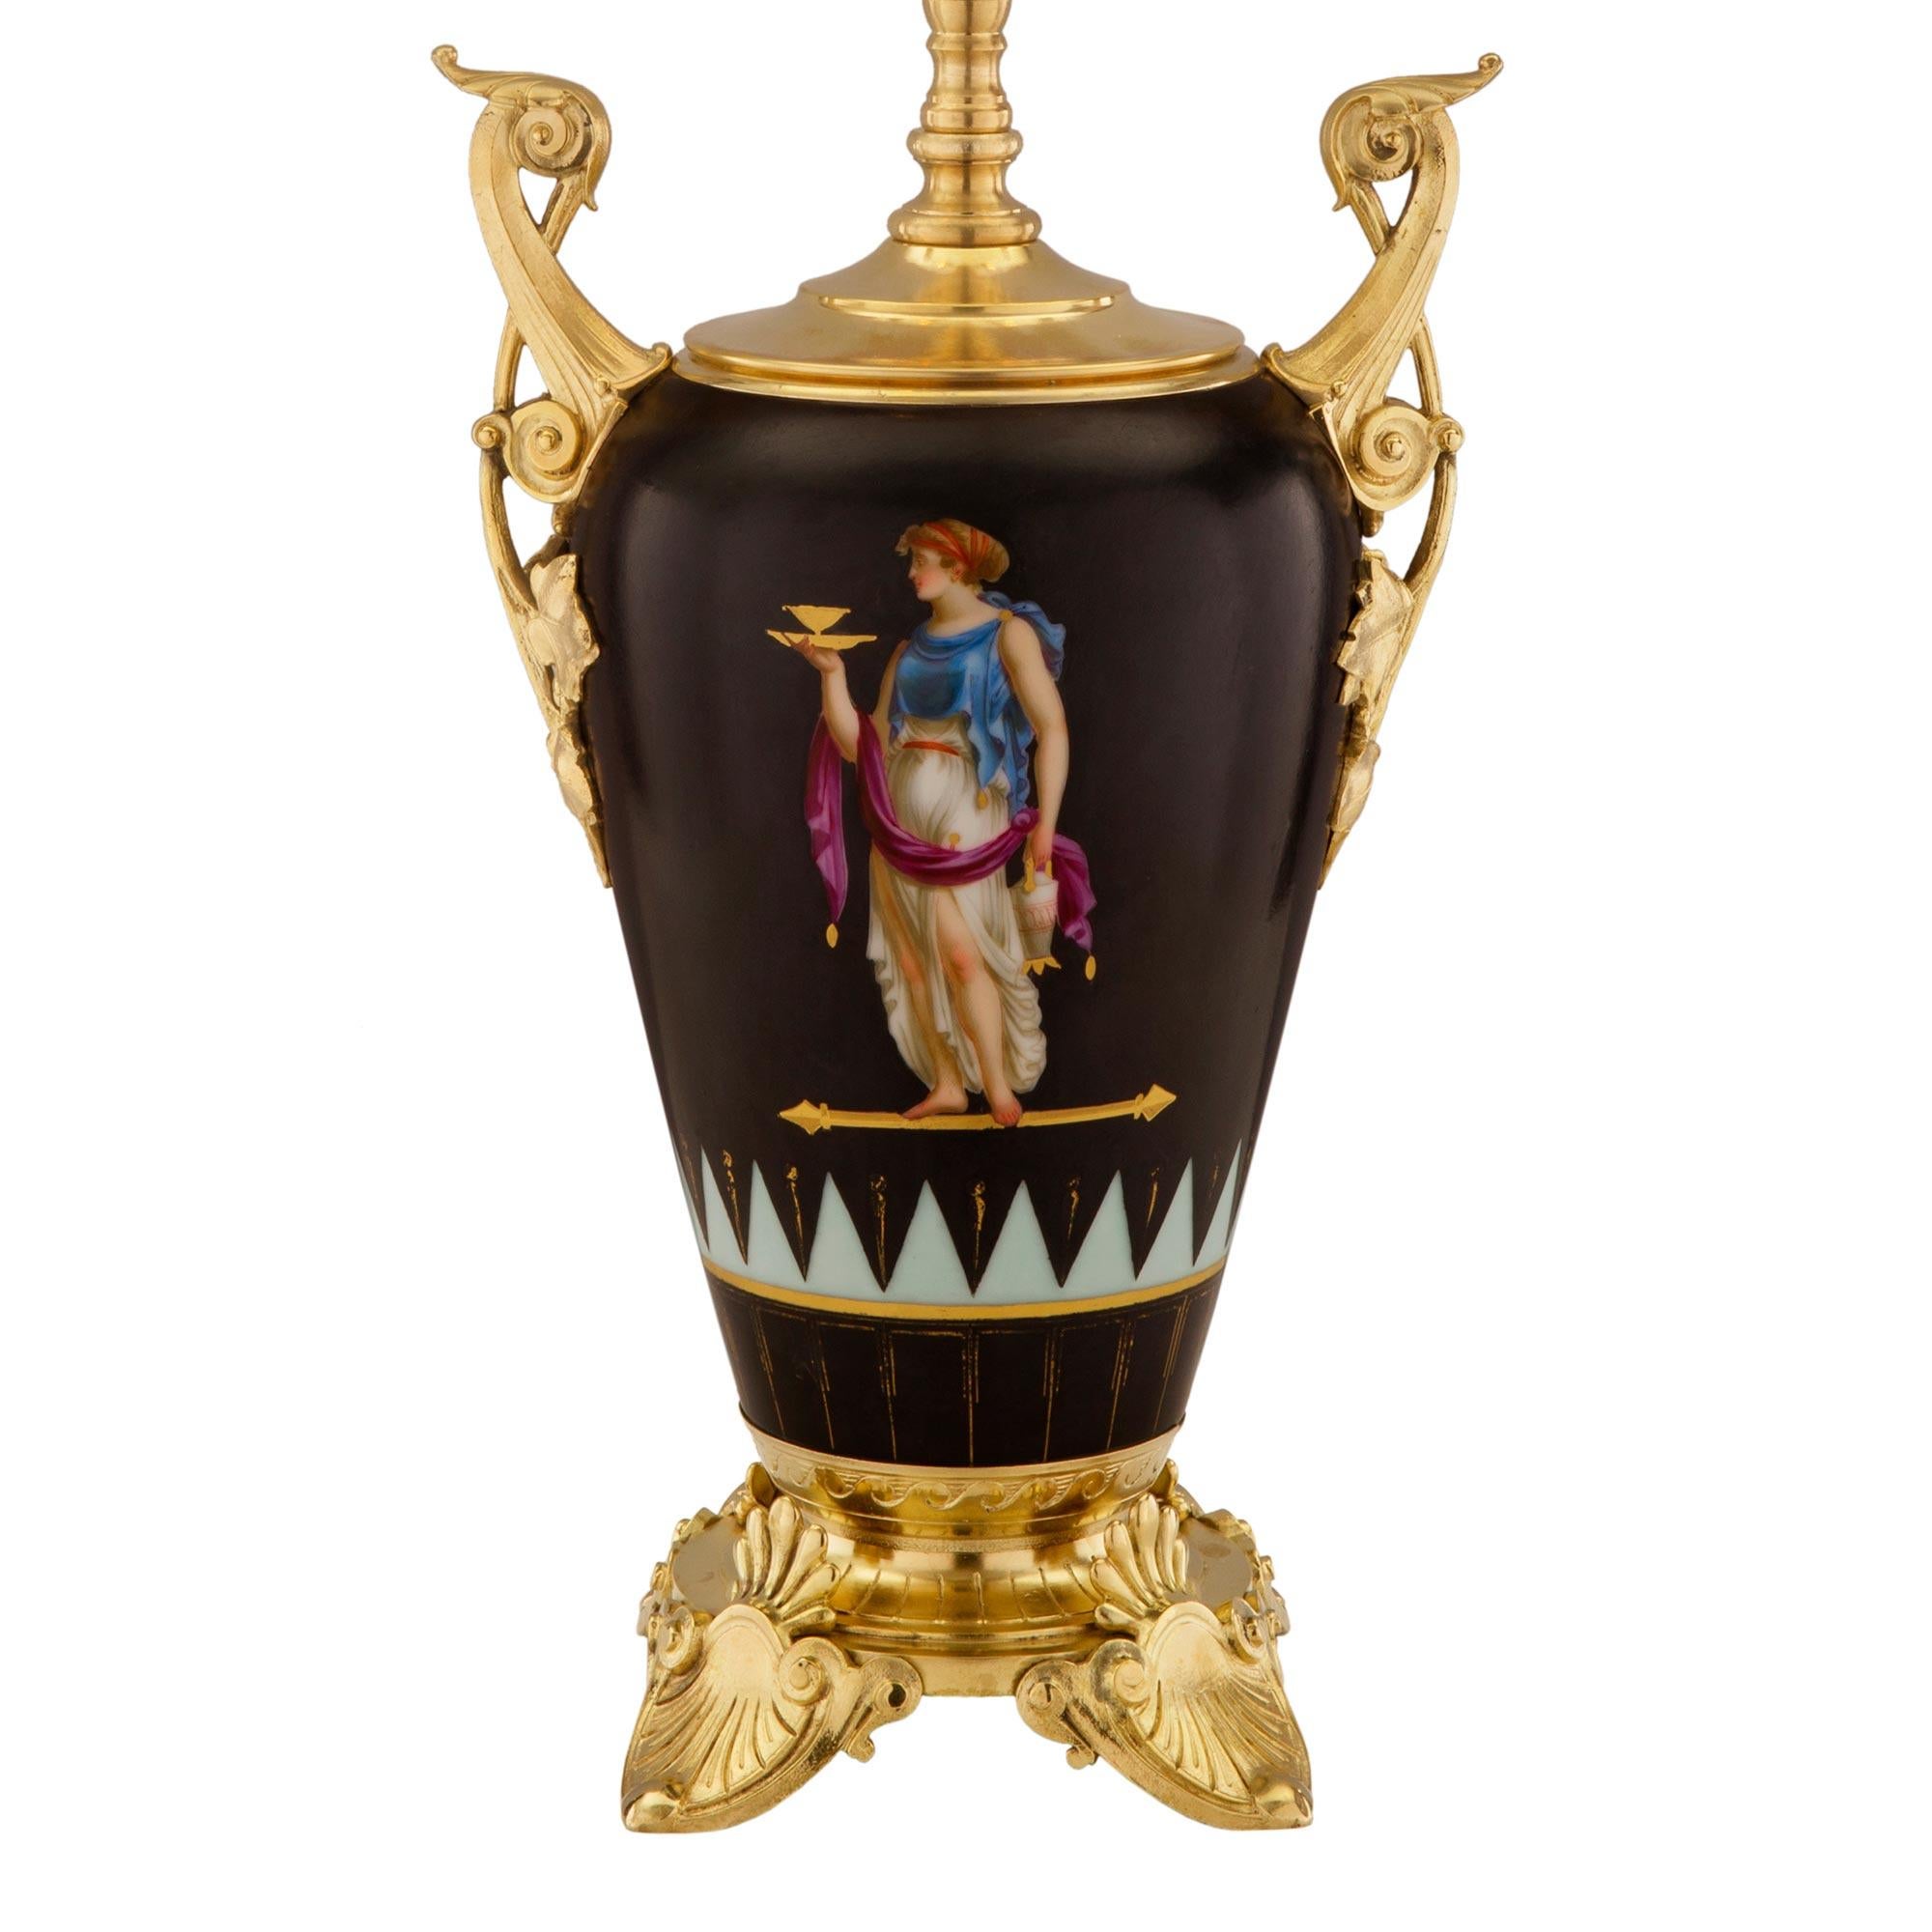 An exceptional French 19th century Neo-Grec st. ormolu and porcelain lamp. The lamp is raised by striking and richly chased palmette designed feet. Above, is the mottled socle pedestal with a fluted design and Vitruvian scrolls. The most decorative